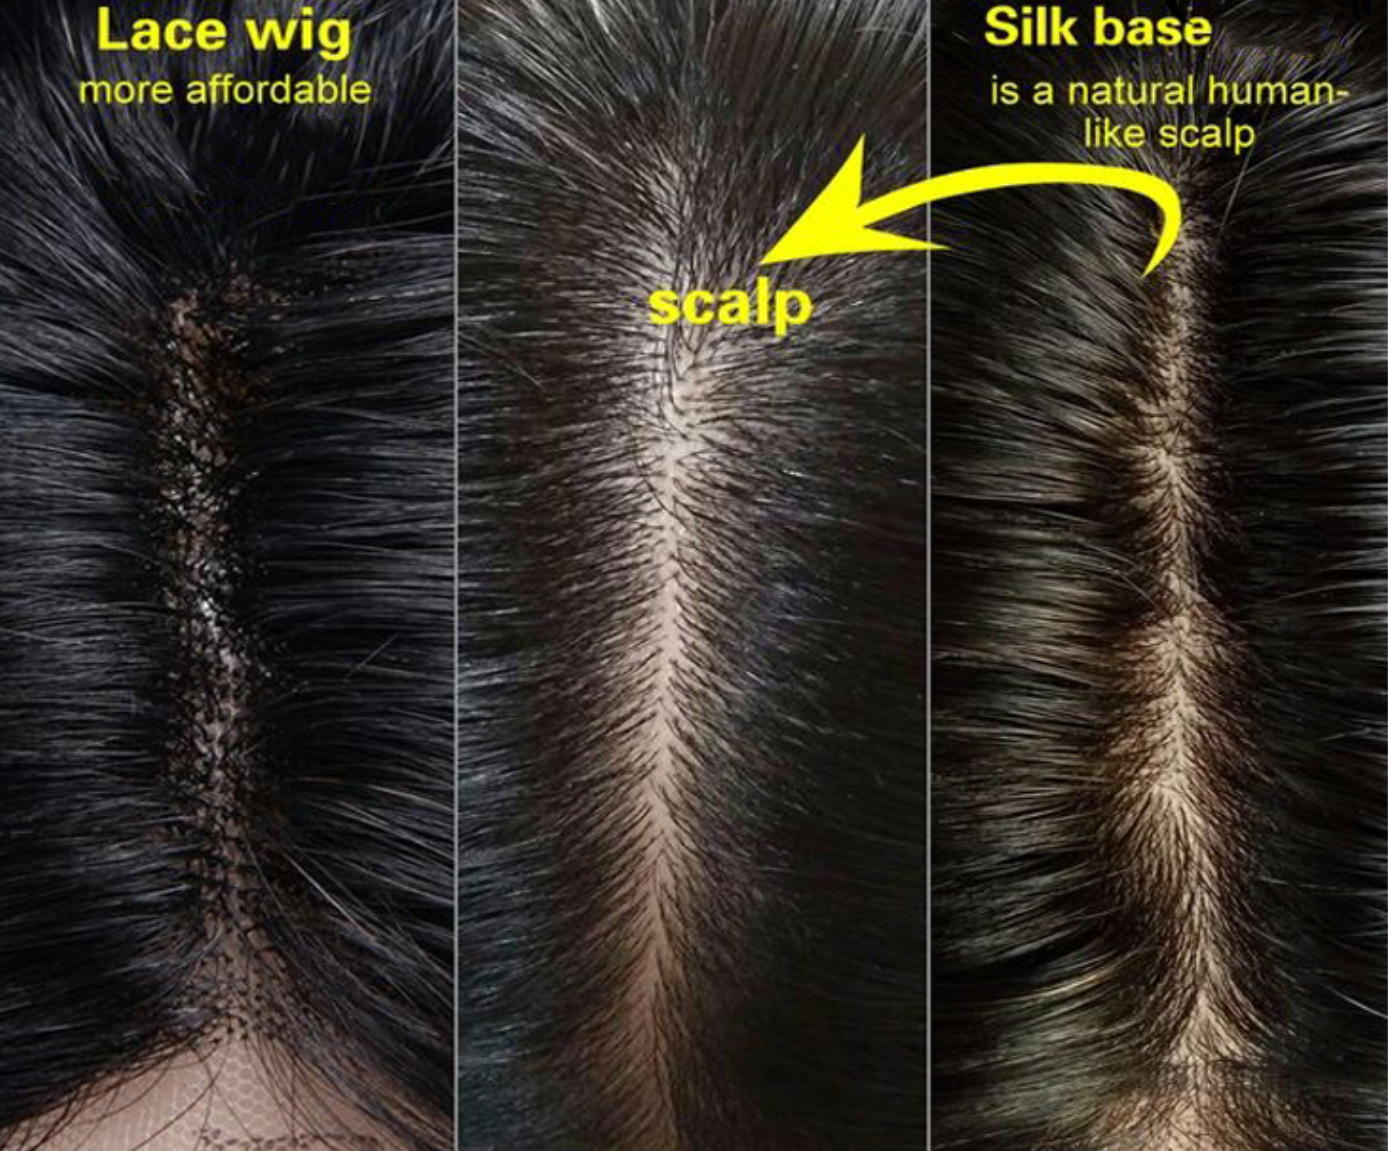 Difference Between a Silk Base and Lace Wig